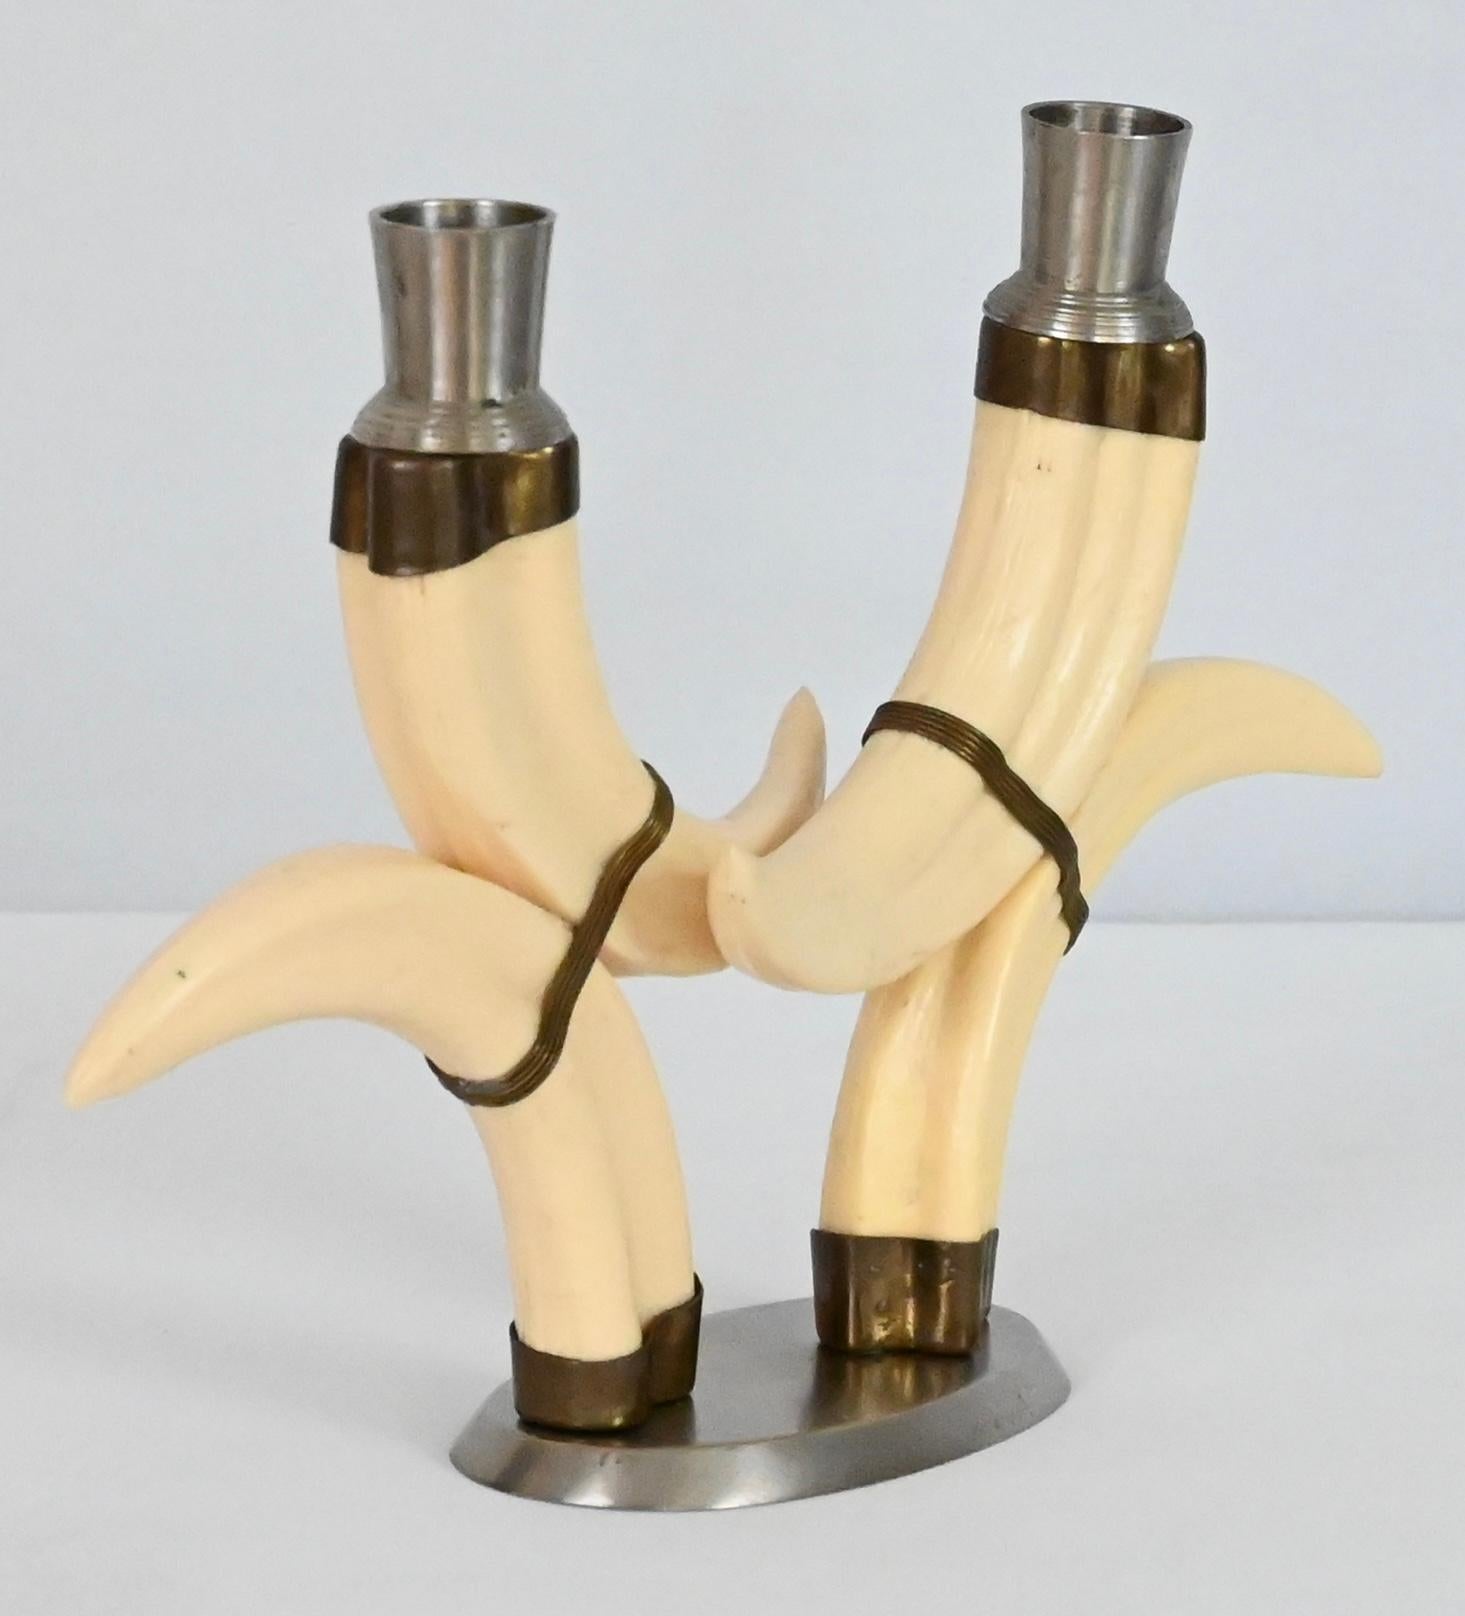 A stunning pair of beige faux horn candlesticks, brass decorations and nickel plated tips, circa 1970. 

These stylishly design candlesticks would enhance any table, counter, console, credenza in a variety of interiors.

Very good original